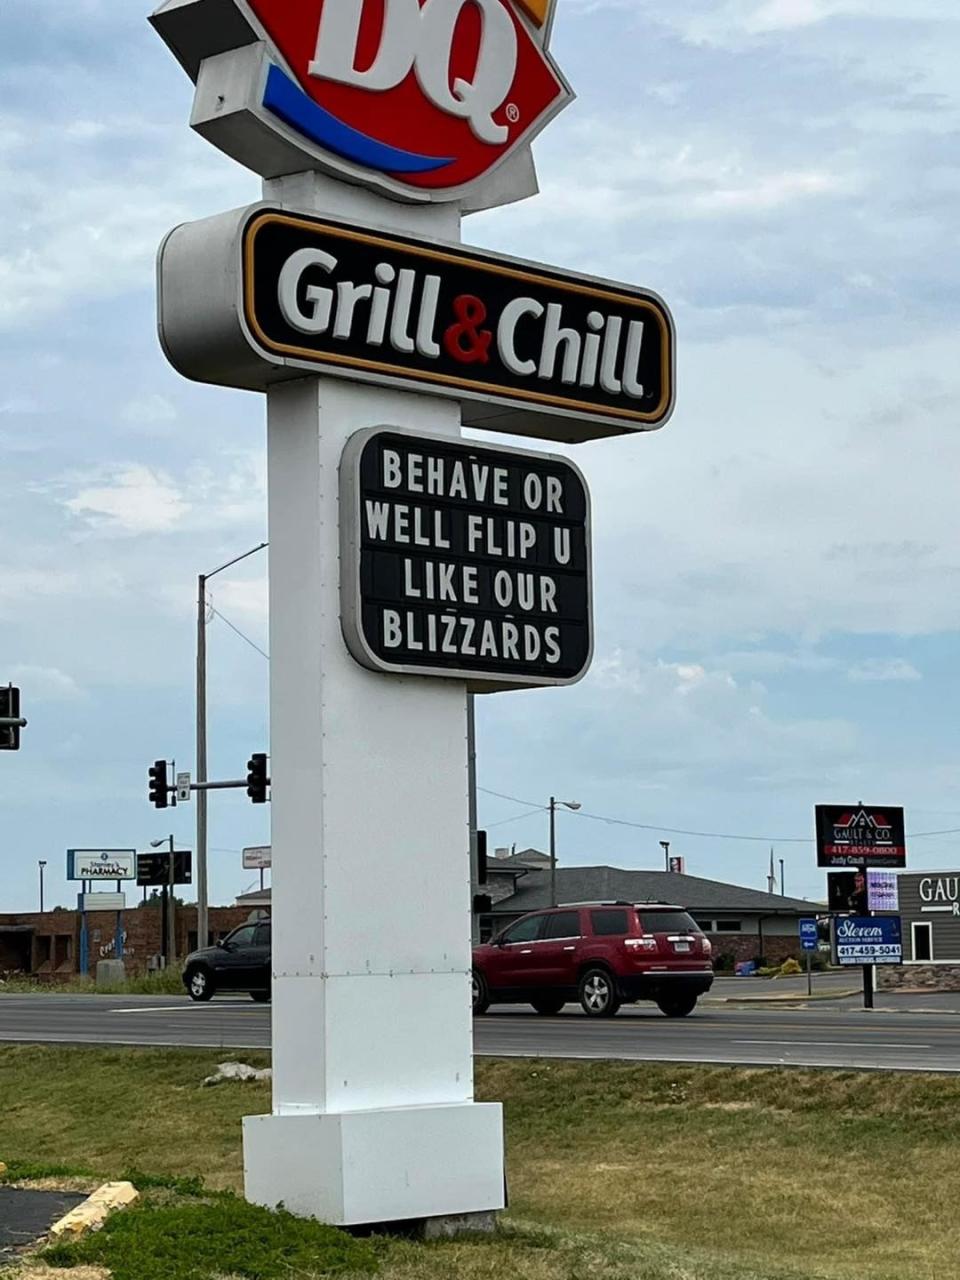 Dairy Queen's sign says "Behave or we'll flip you like our blizzards"